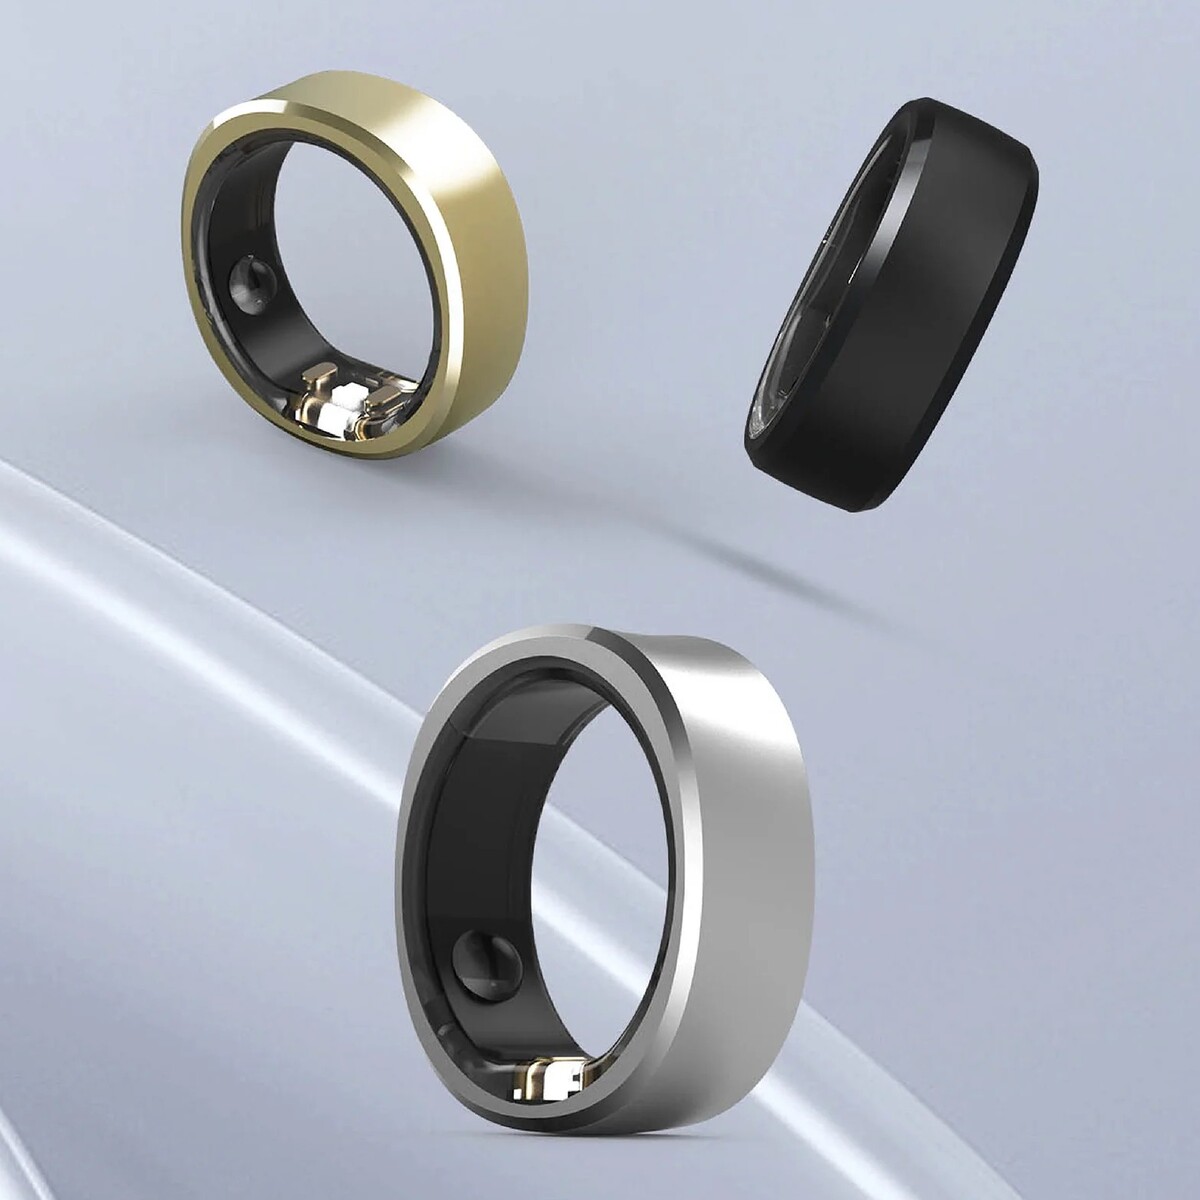 RingConn Review: A Smart Ring Tracking Your Health